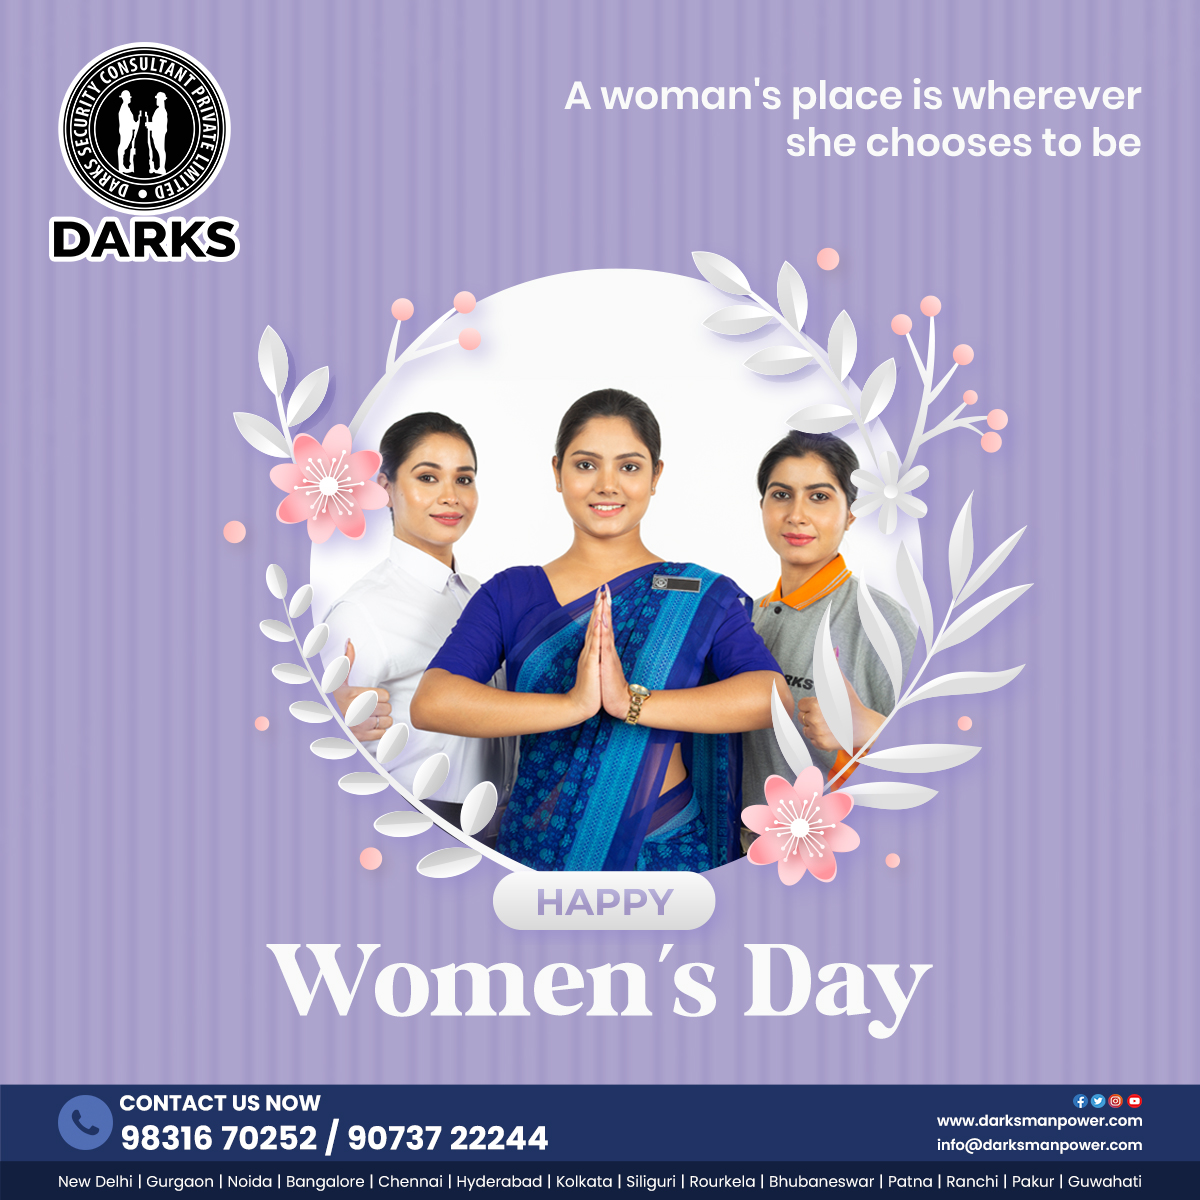 Promoting the Shakti, the divine power which protects and nourishes all the beings from adversities. Happy Women's Day from Darks Manpower.

#WomensDay2024 #happywomensday❤️ #women #womensupportingwomen #HappyWomensMonth #darksmanpower